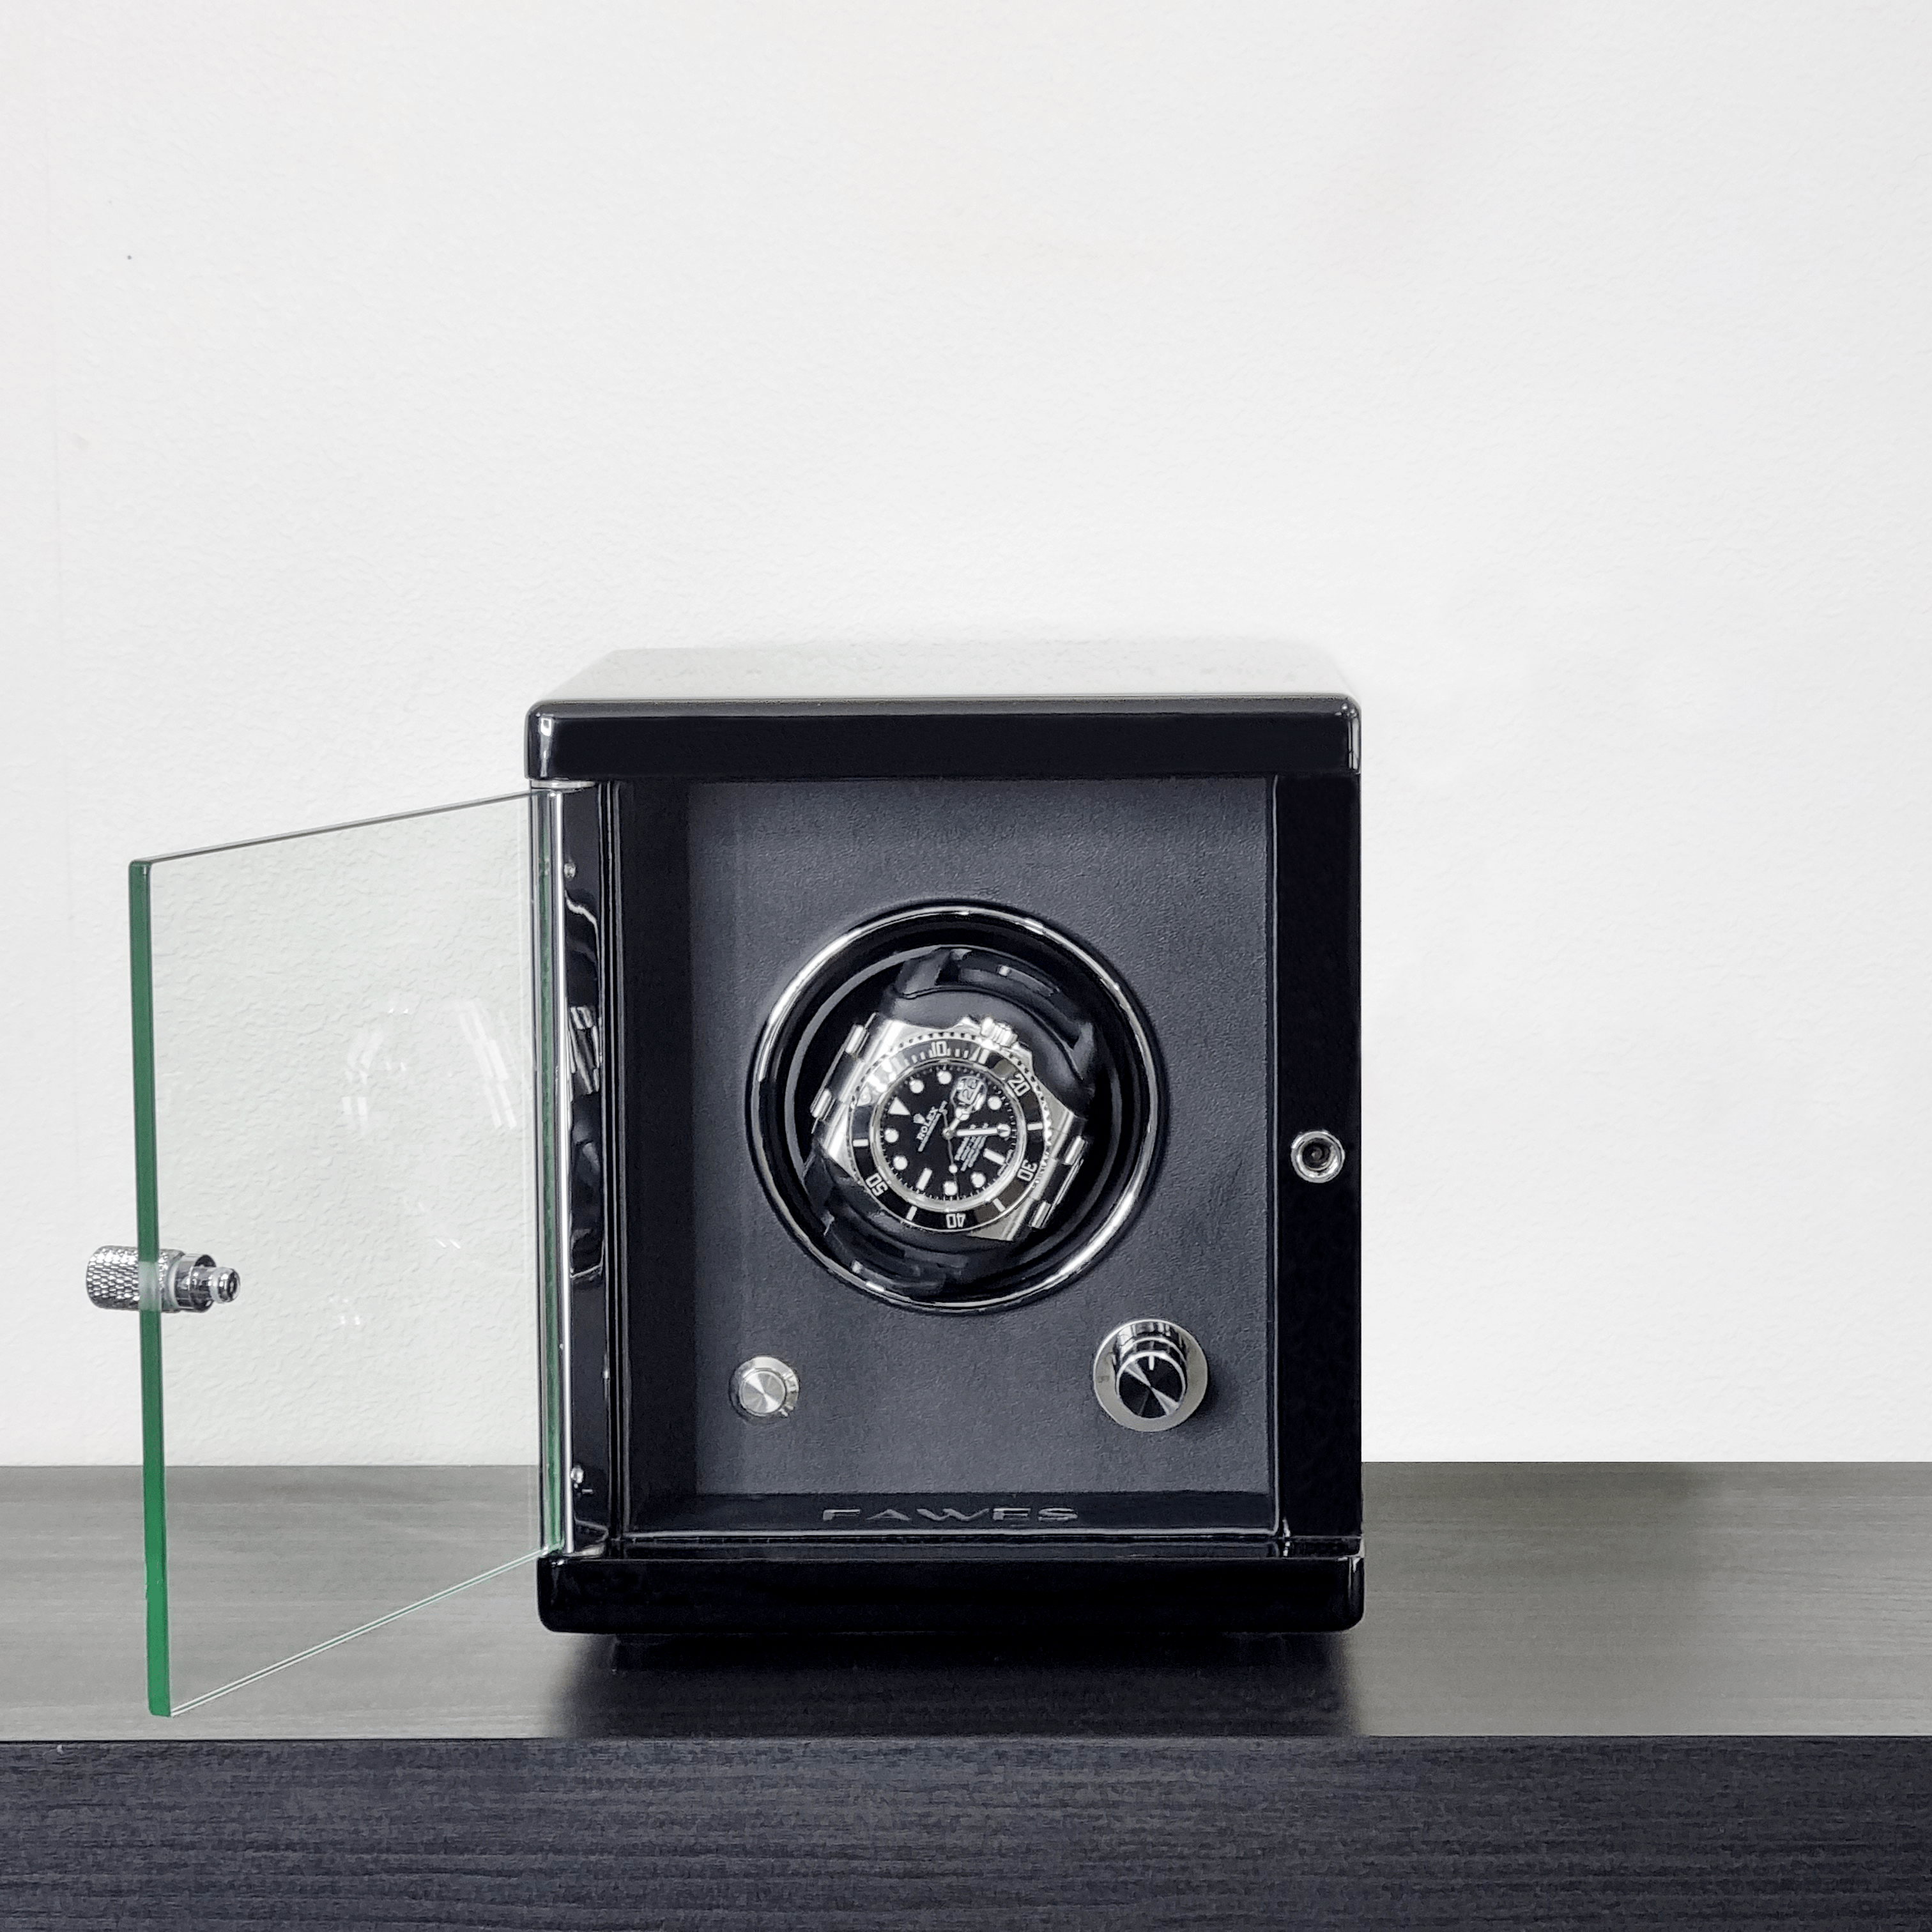 X31 Classic Automatic Watch Winder - 1 Epitope